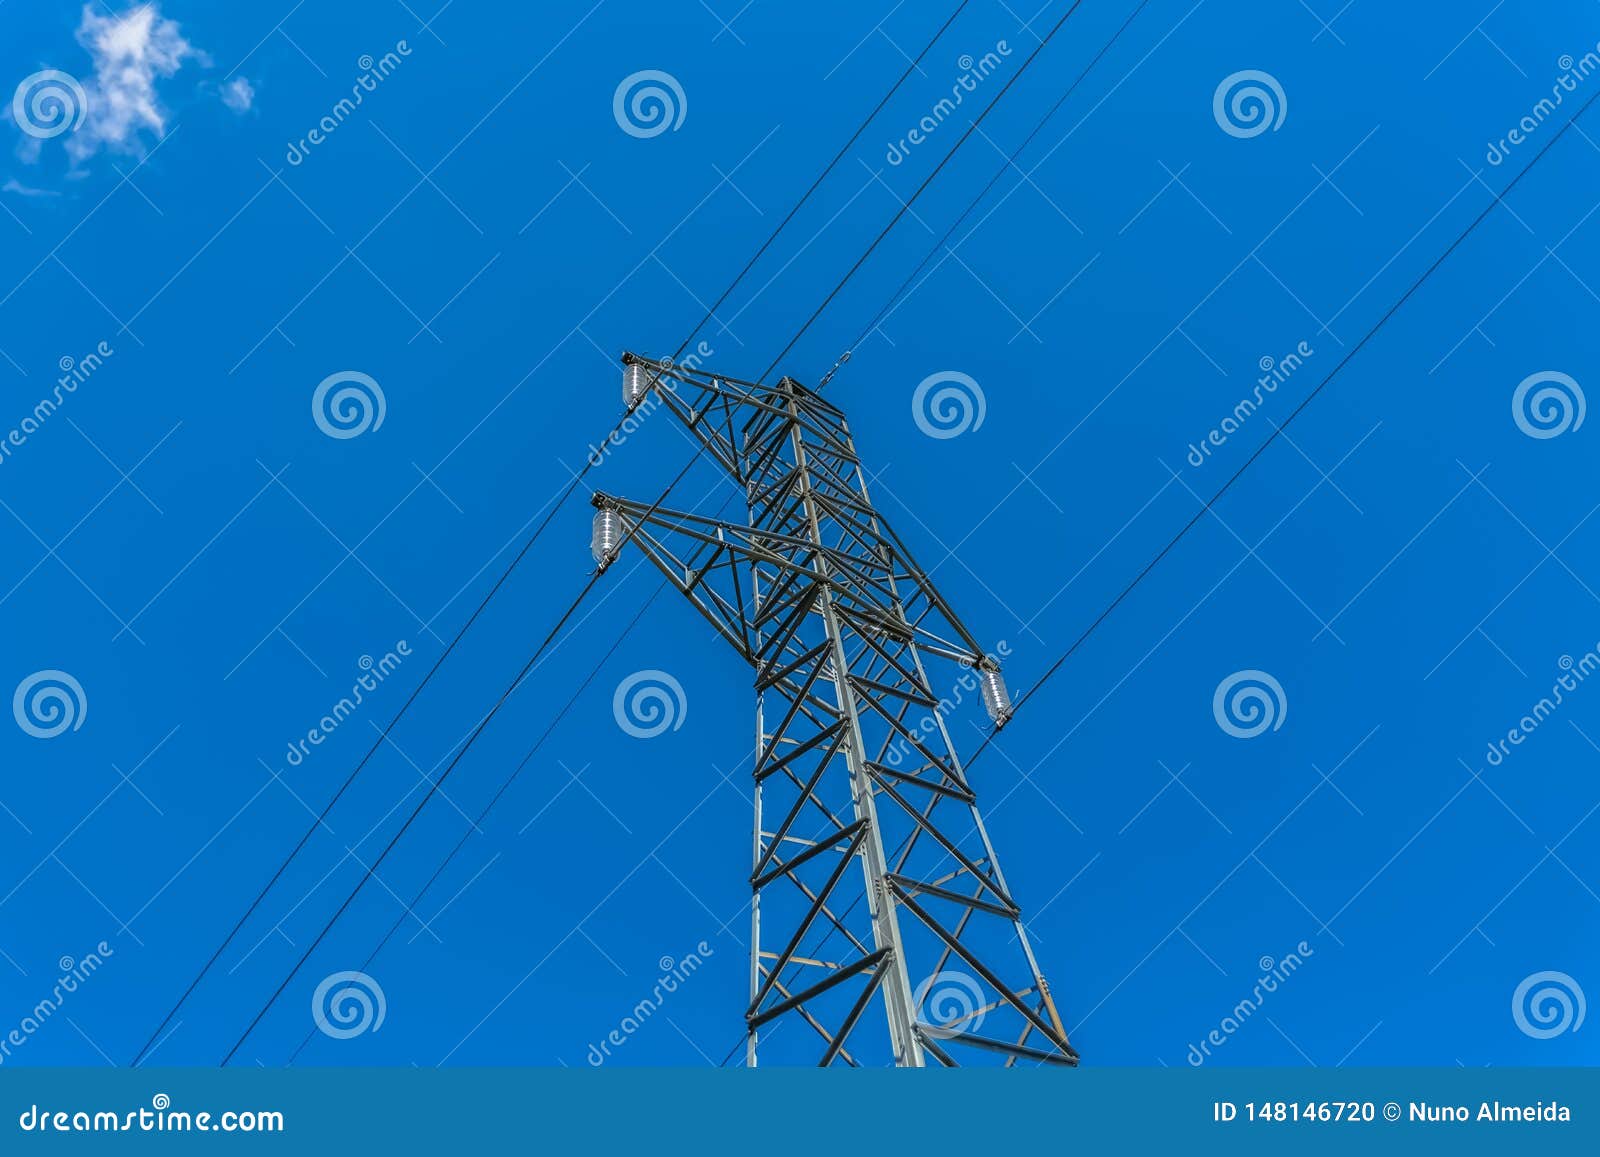 view of metallic structure tower and power lines